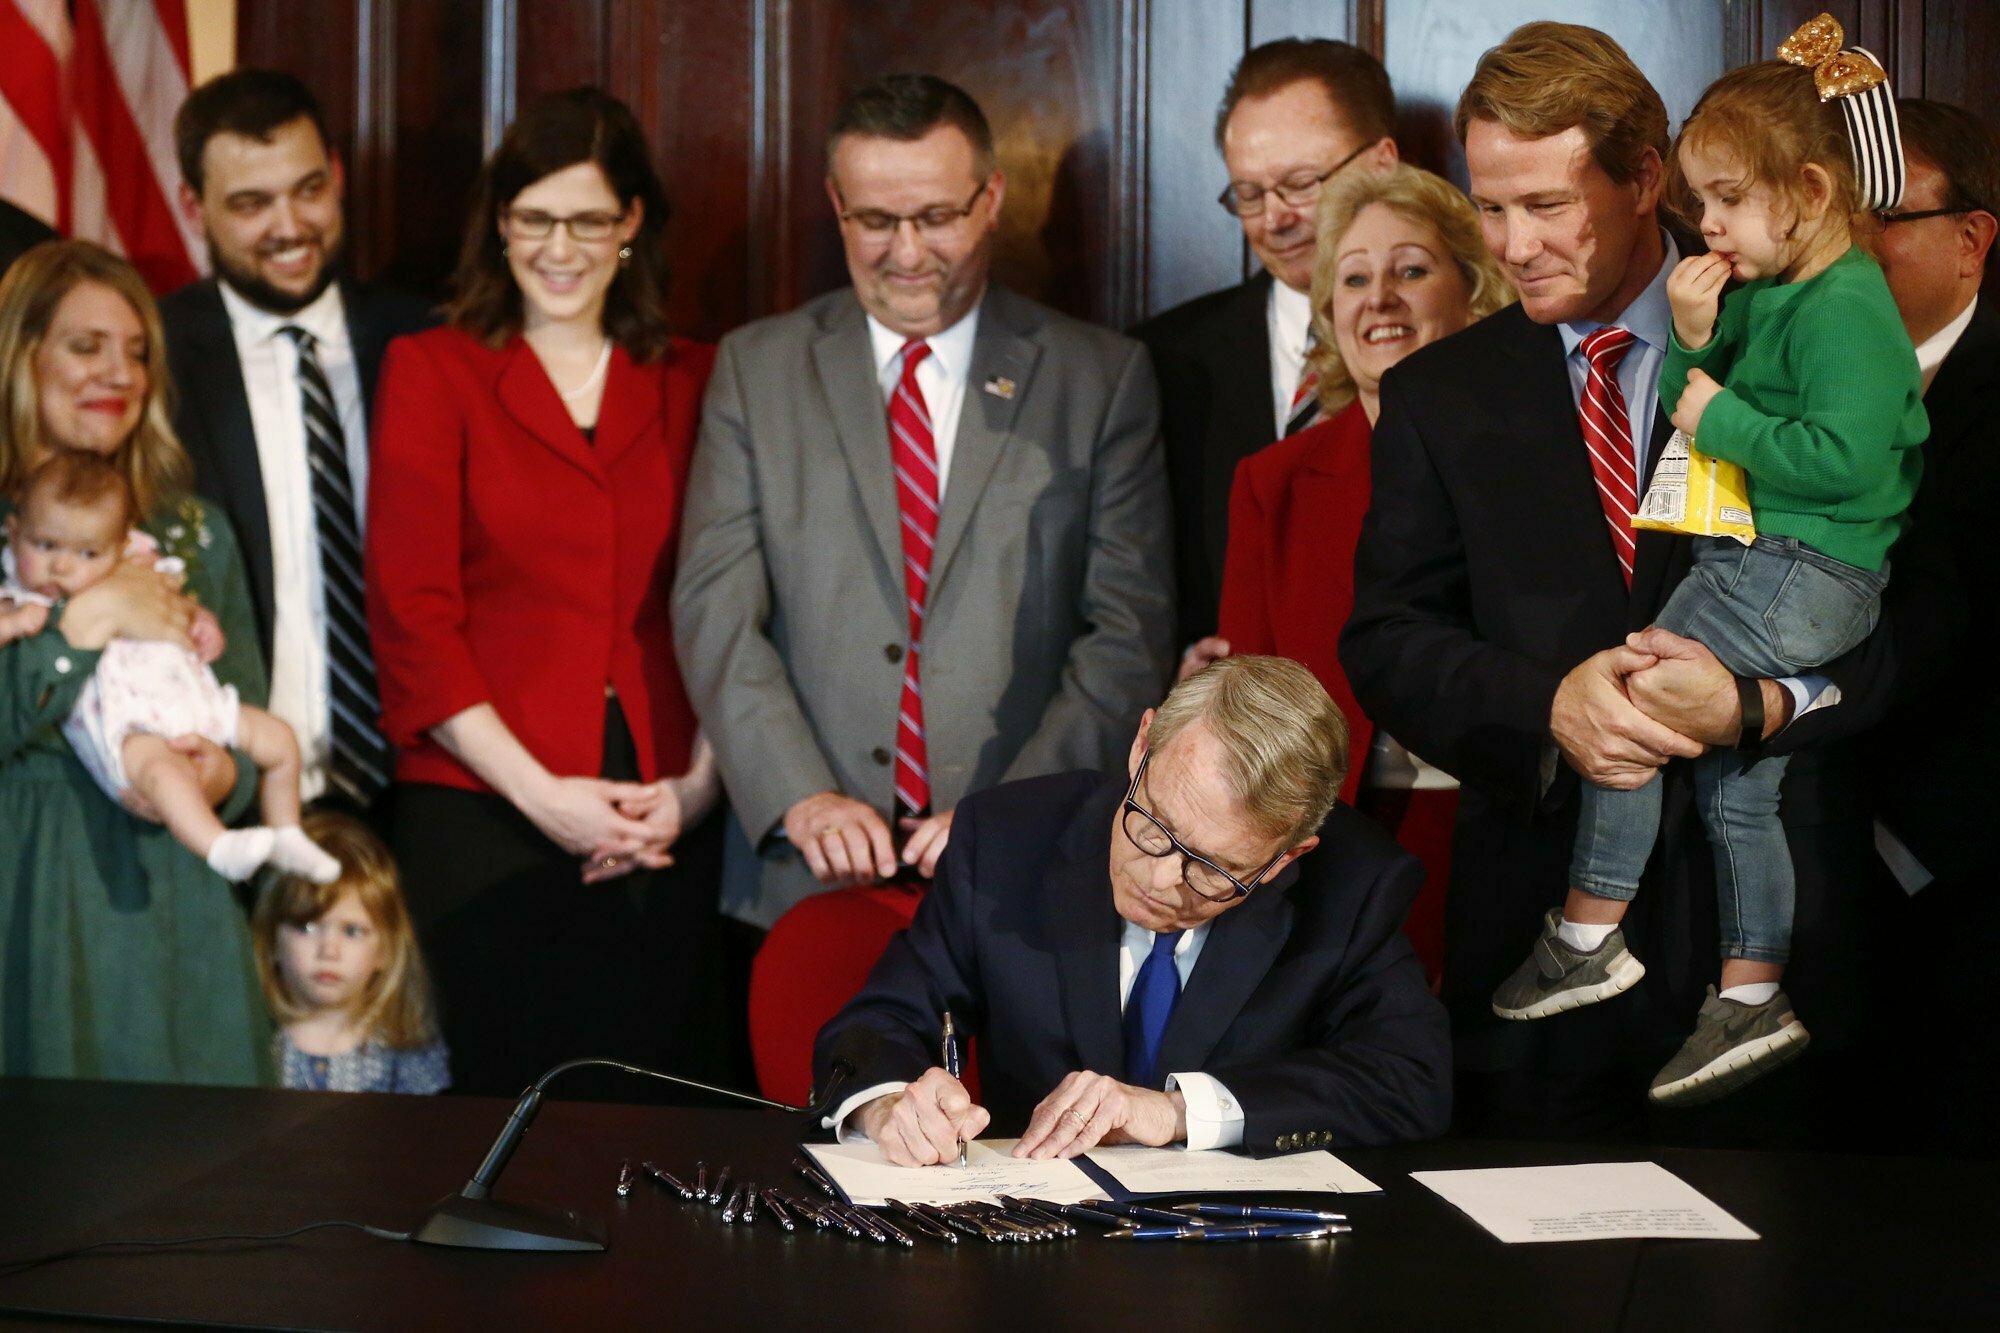 PHOTO: Gov. Mike DeWine speaks before signing a bill imposing one of the nation's toughest abortion restrictions, April 11, 2019 in Columbus, Ohio.